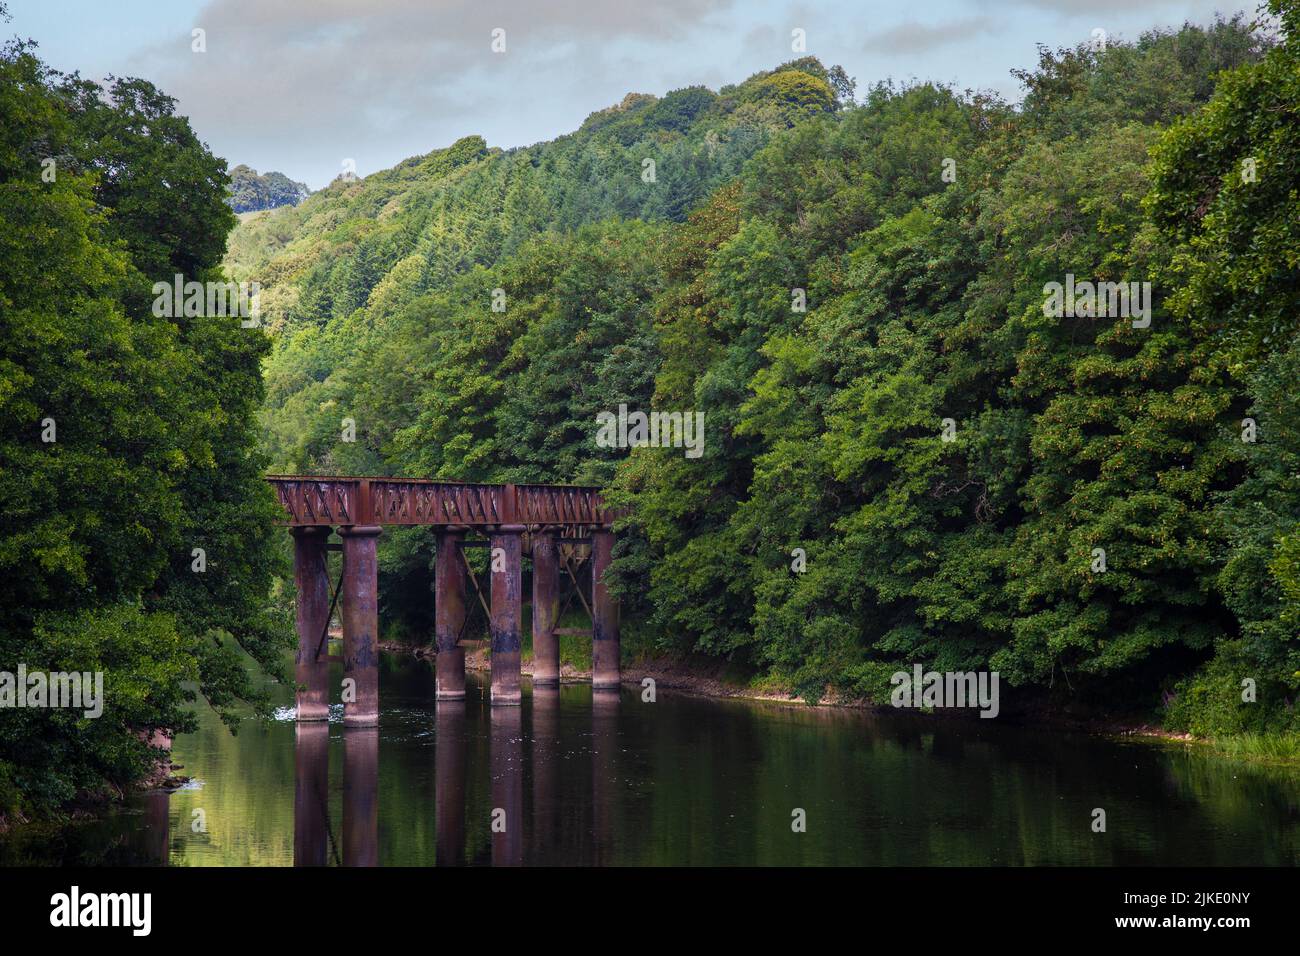 Redbrook Bridge, crossing the River Wye between Gloucestershire (England) and Monmouthshire (Wales).  Originally a railway bridge carrying the Ross an Stock Photo